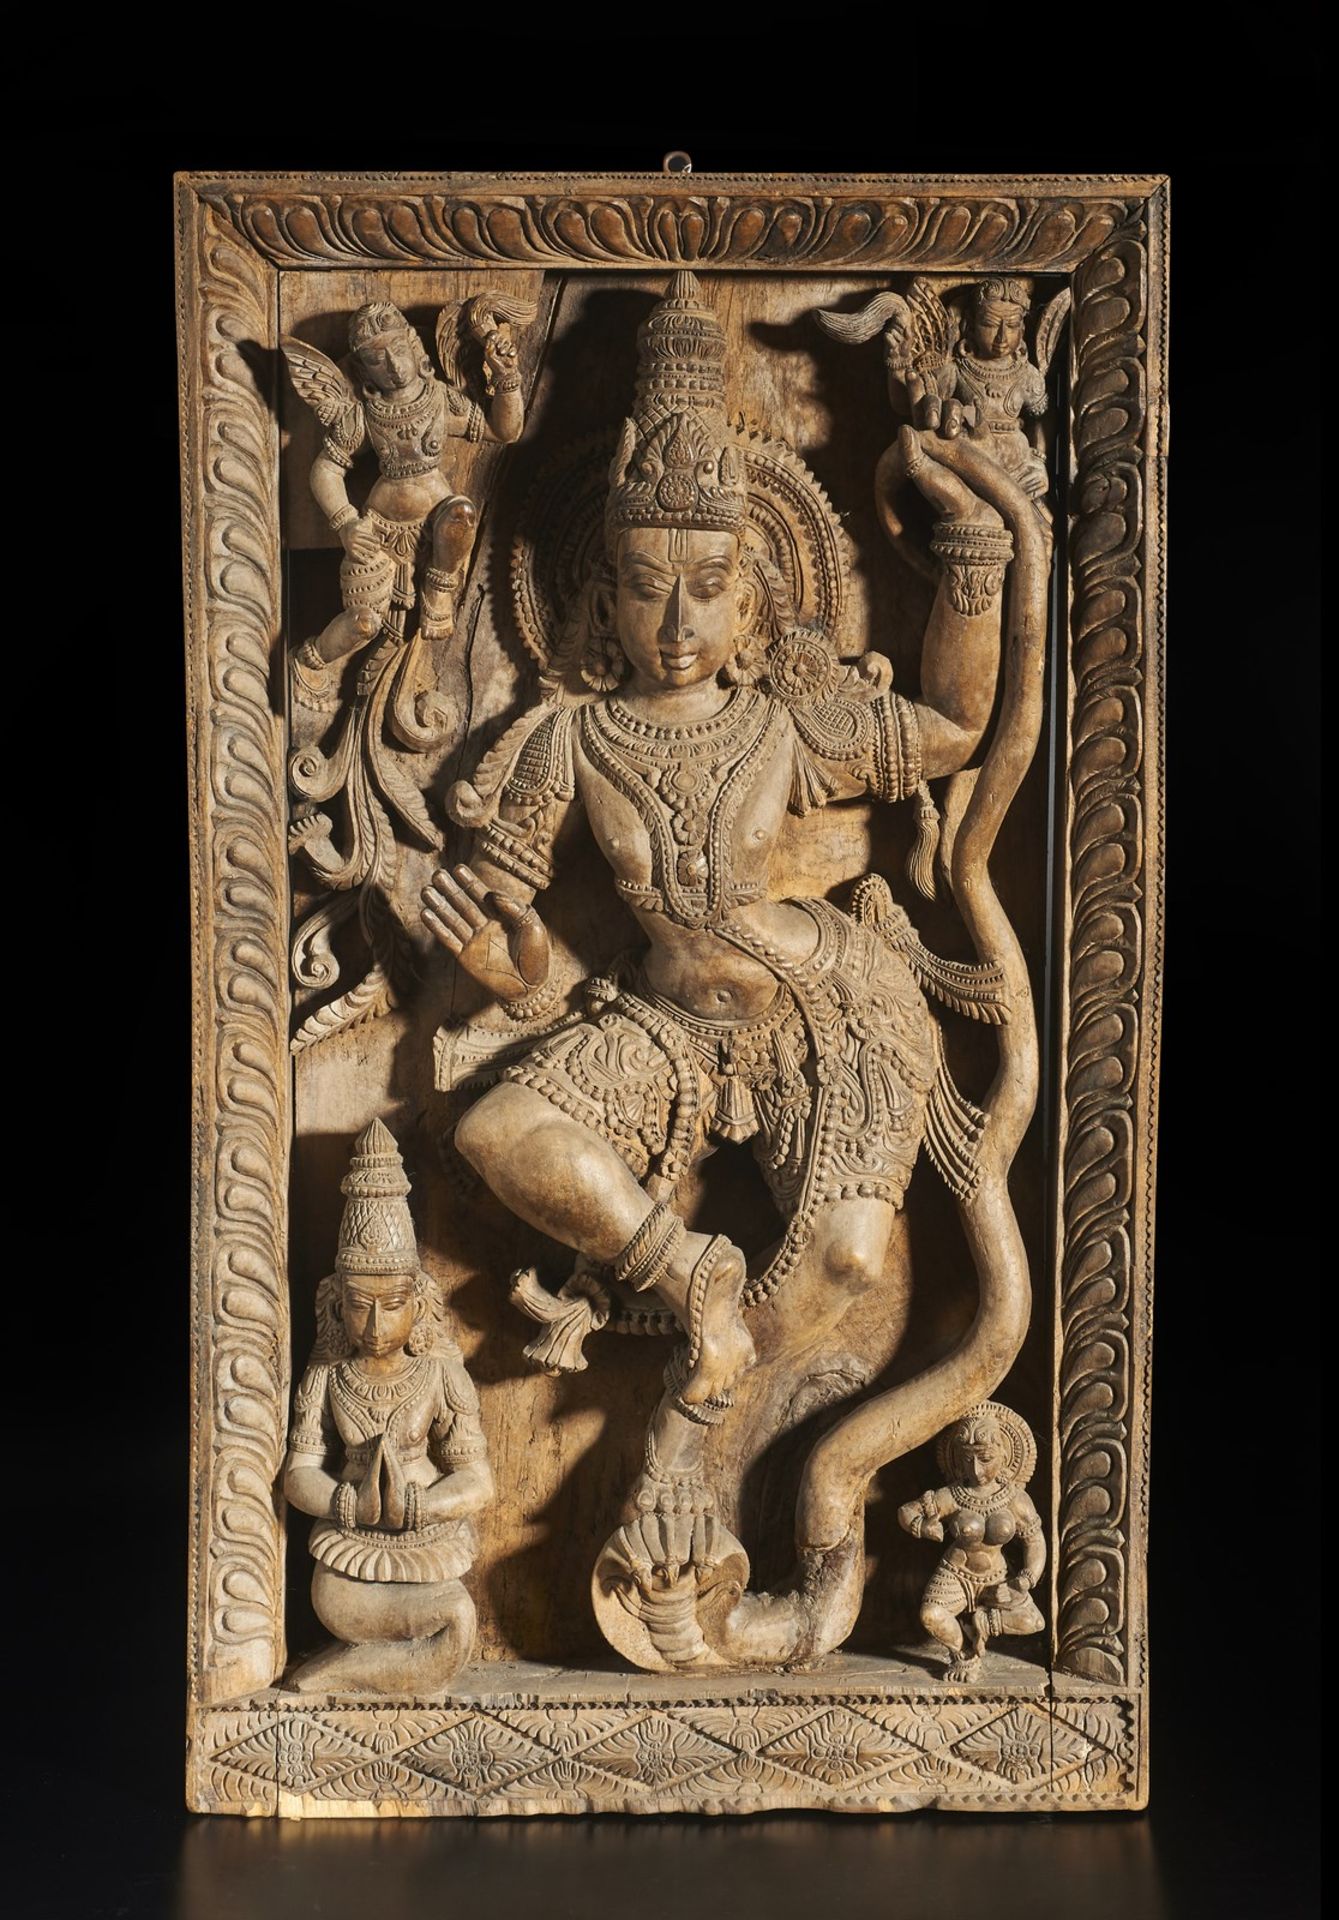 A large wooden carved frieze depicting a dancing deity Southern India, 19th century Cm 57,00 x 97,